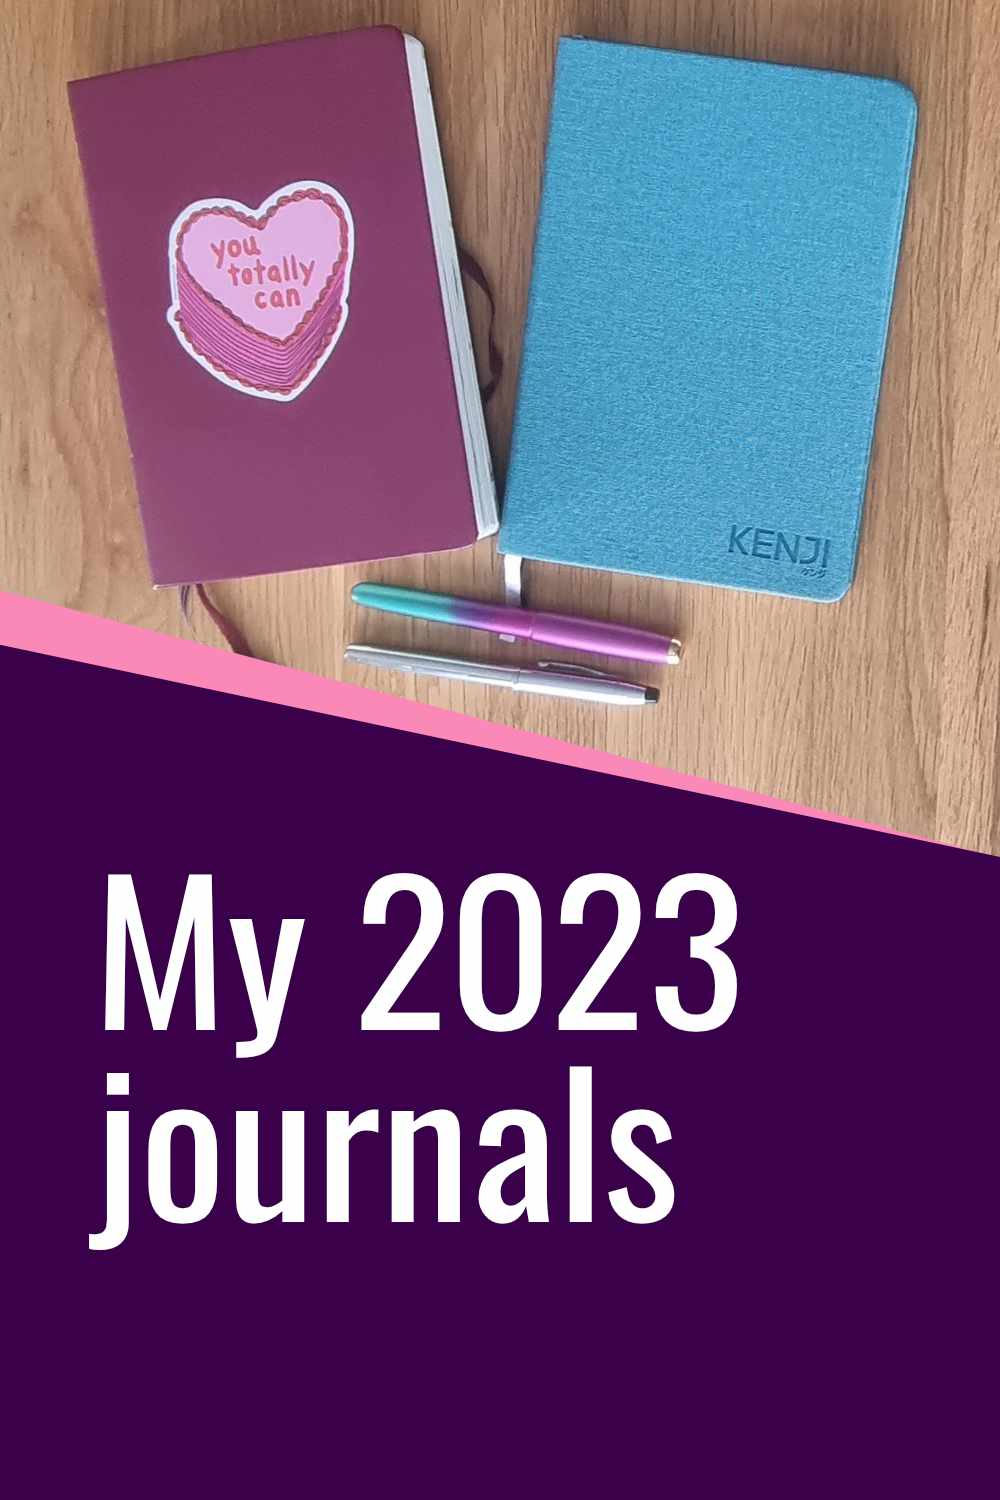 Social media image showing two journals and two fountain pens. The text says My 2023 journals